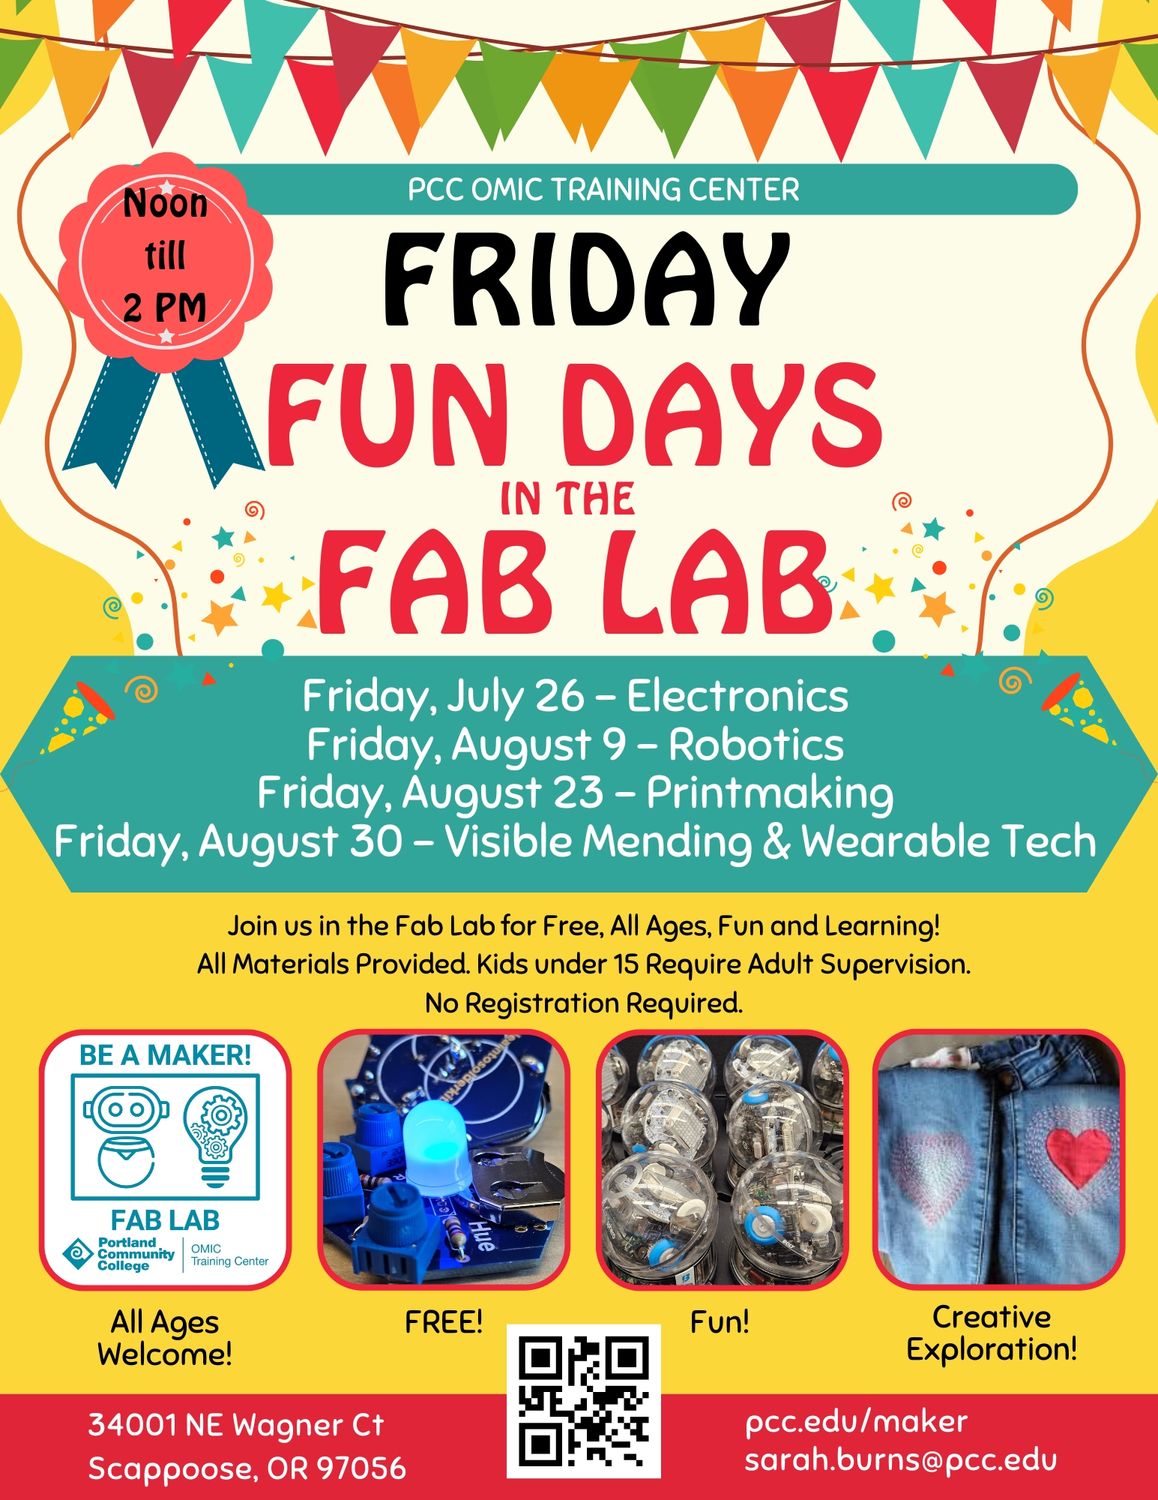 Friday Fun Days in the Fab Lab

12:00 PM - 2:00 PM

Friday, July 26th - Electronics

Friday, August 9th - Robotics

Friday, August 23th - Printmaking

Friday, August 30th - Visible Mending & Wearable Tech

Join us in the Fab Lab for free, all ages, fun and learning! All materials provided. Kids under 15 require adult supervision. No registration required.

PCC OMIC Training Center

34001 NE Wagner Ct

Scappoose OR 97056

pcc.edu/maker

sarah.burns@pcc.edu